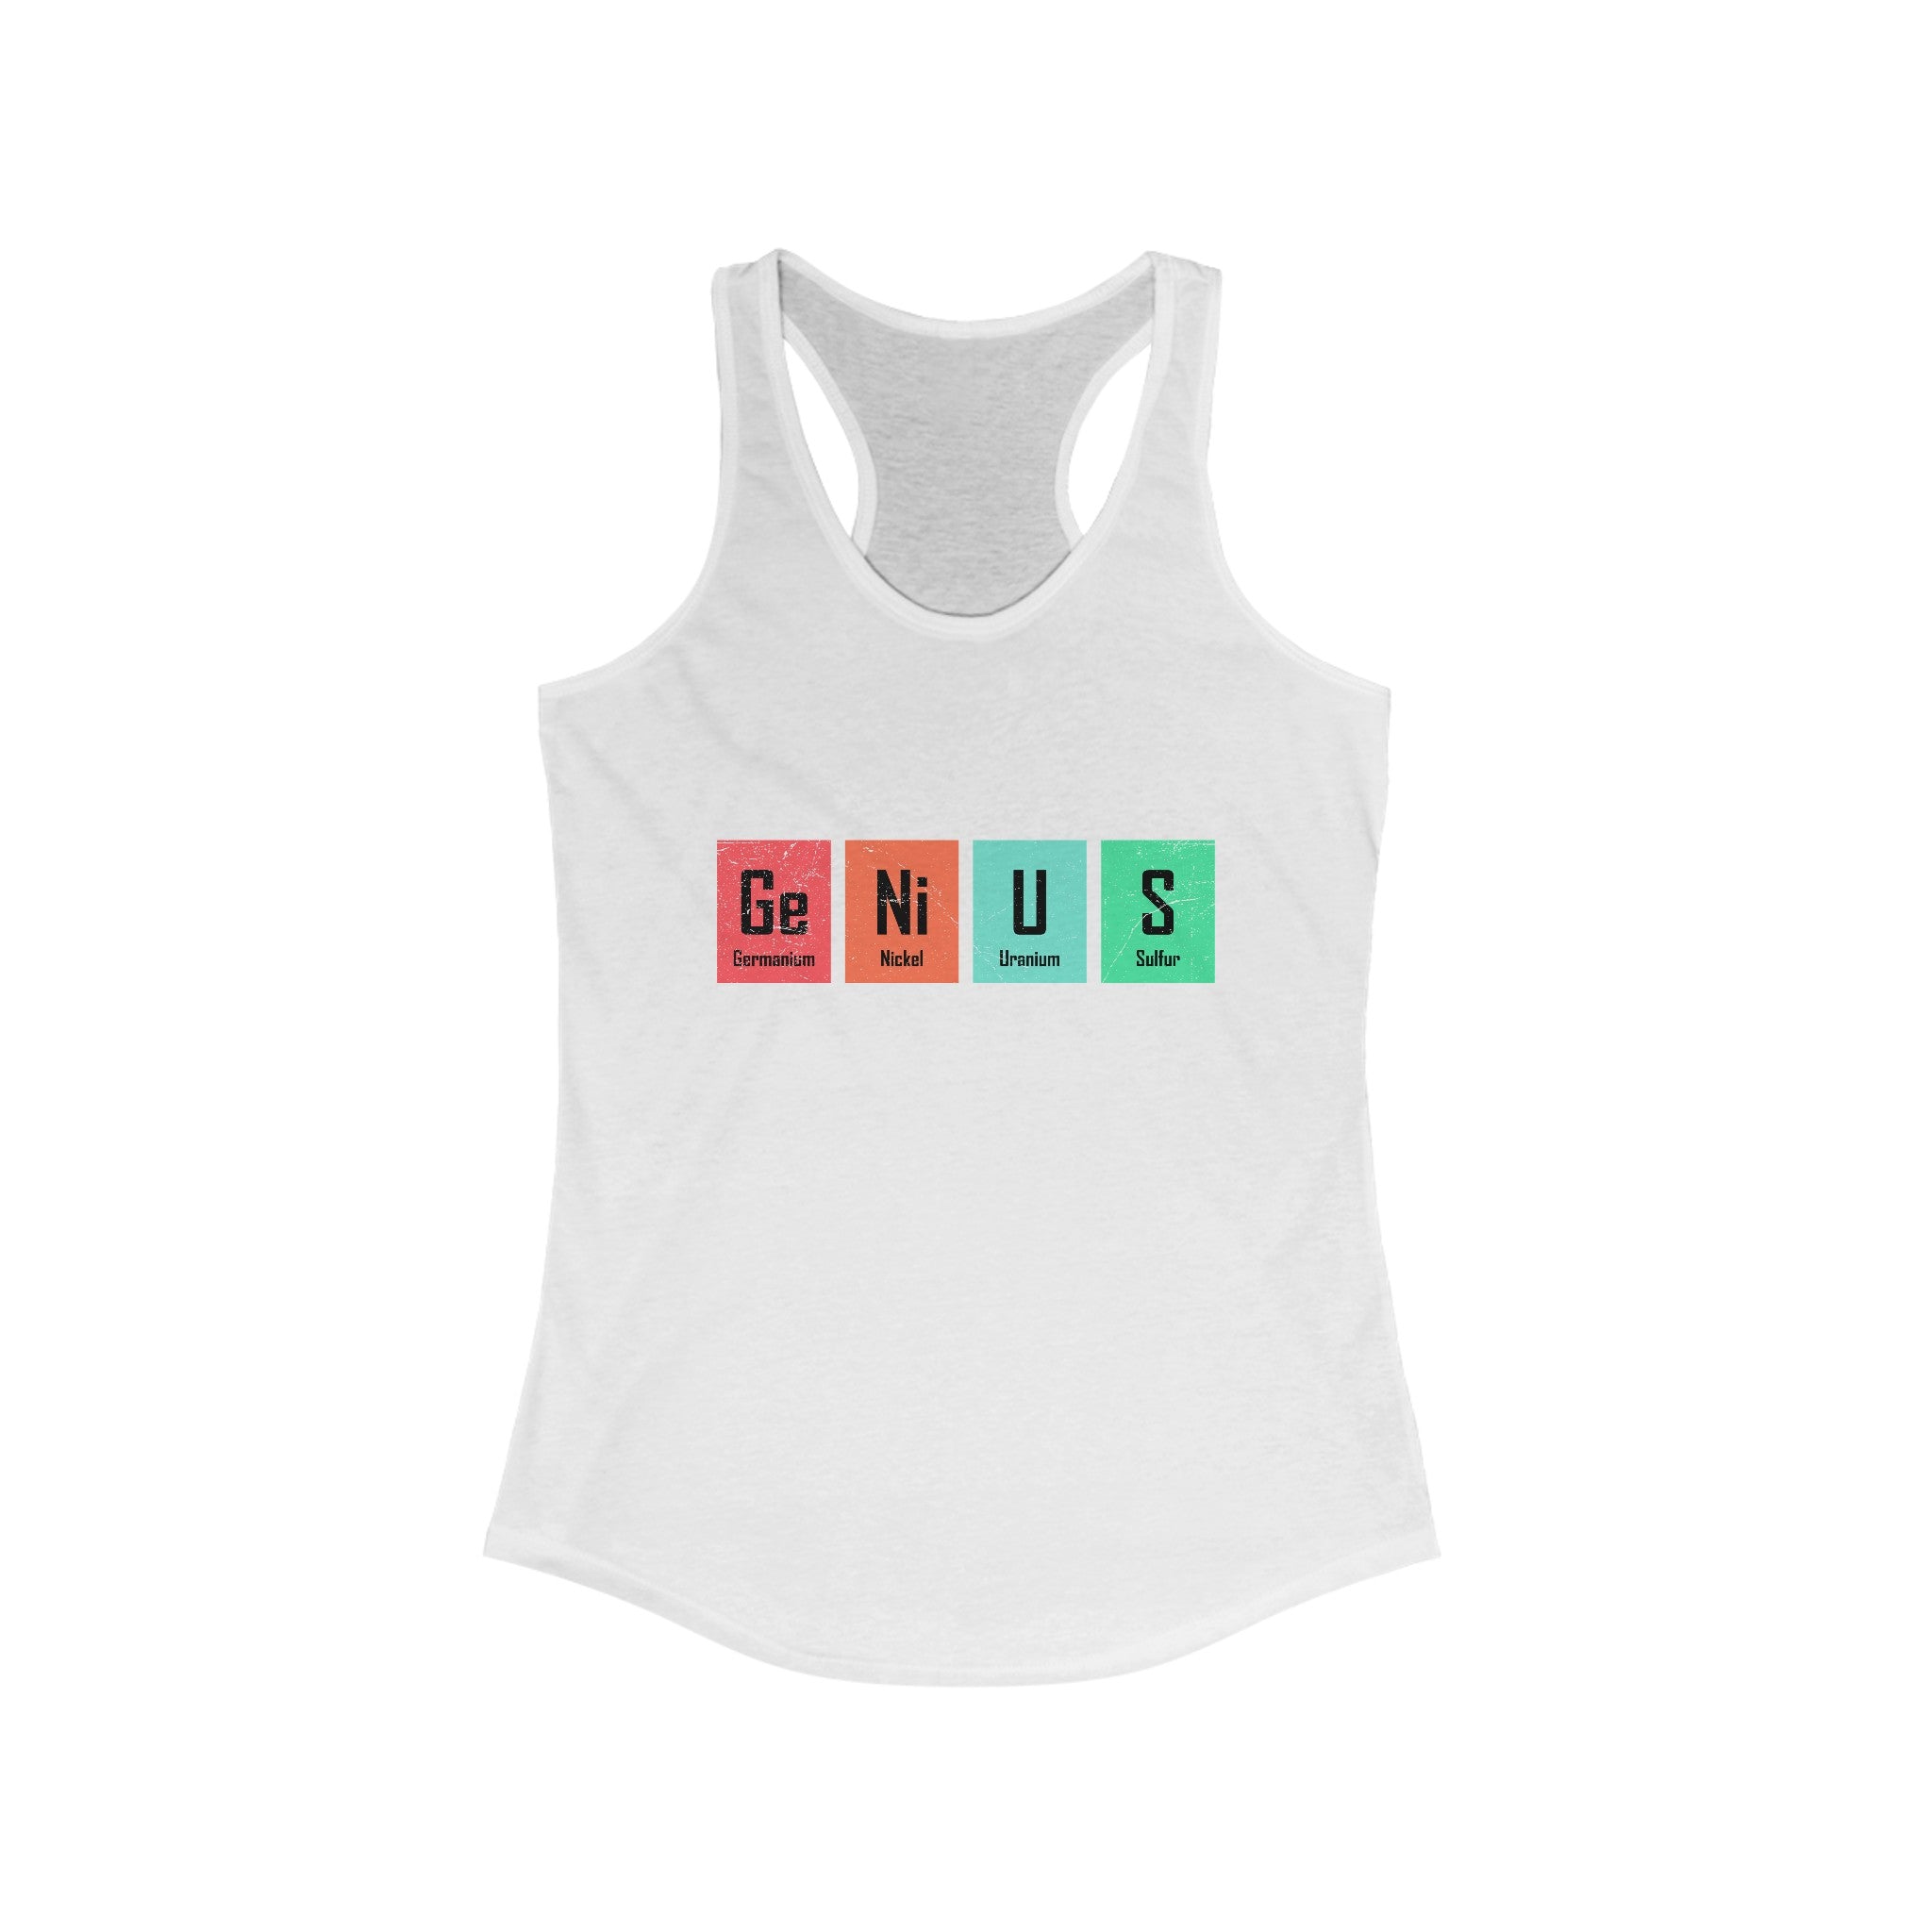 Ge-Ni-U-S - Women's Racerback Tank with a "Genius" design, featuring elements Germainium (Ge), Nickel (Ni), Uranium (U), and Sulfur (S) from the periodic table, printed in colorful blocks on the front. Perfect for an active lifestyle and a workout essential.